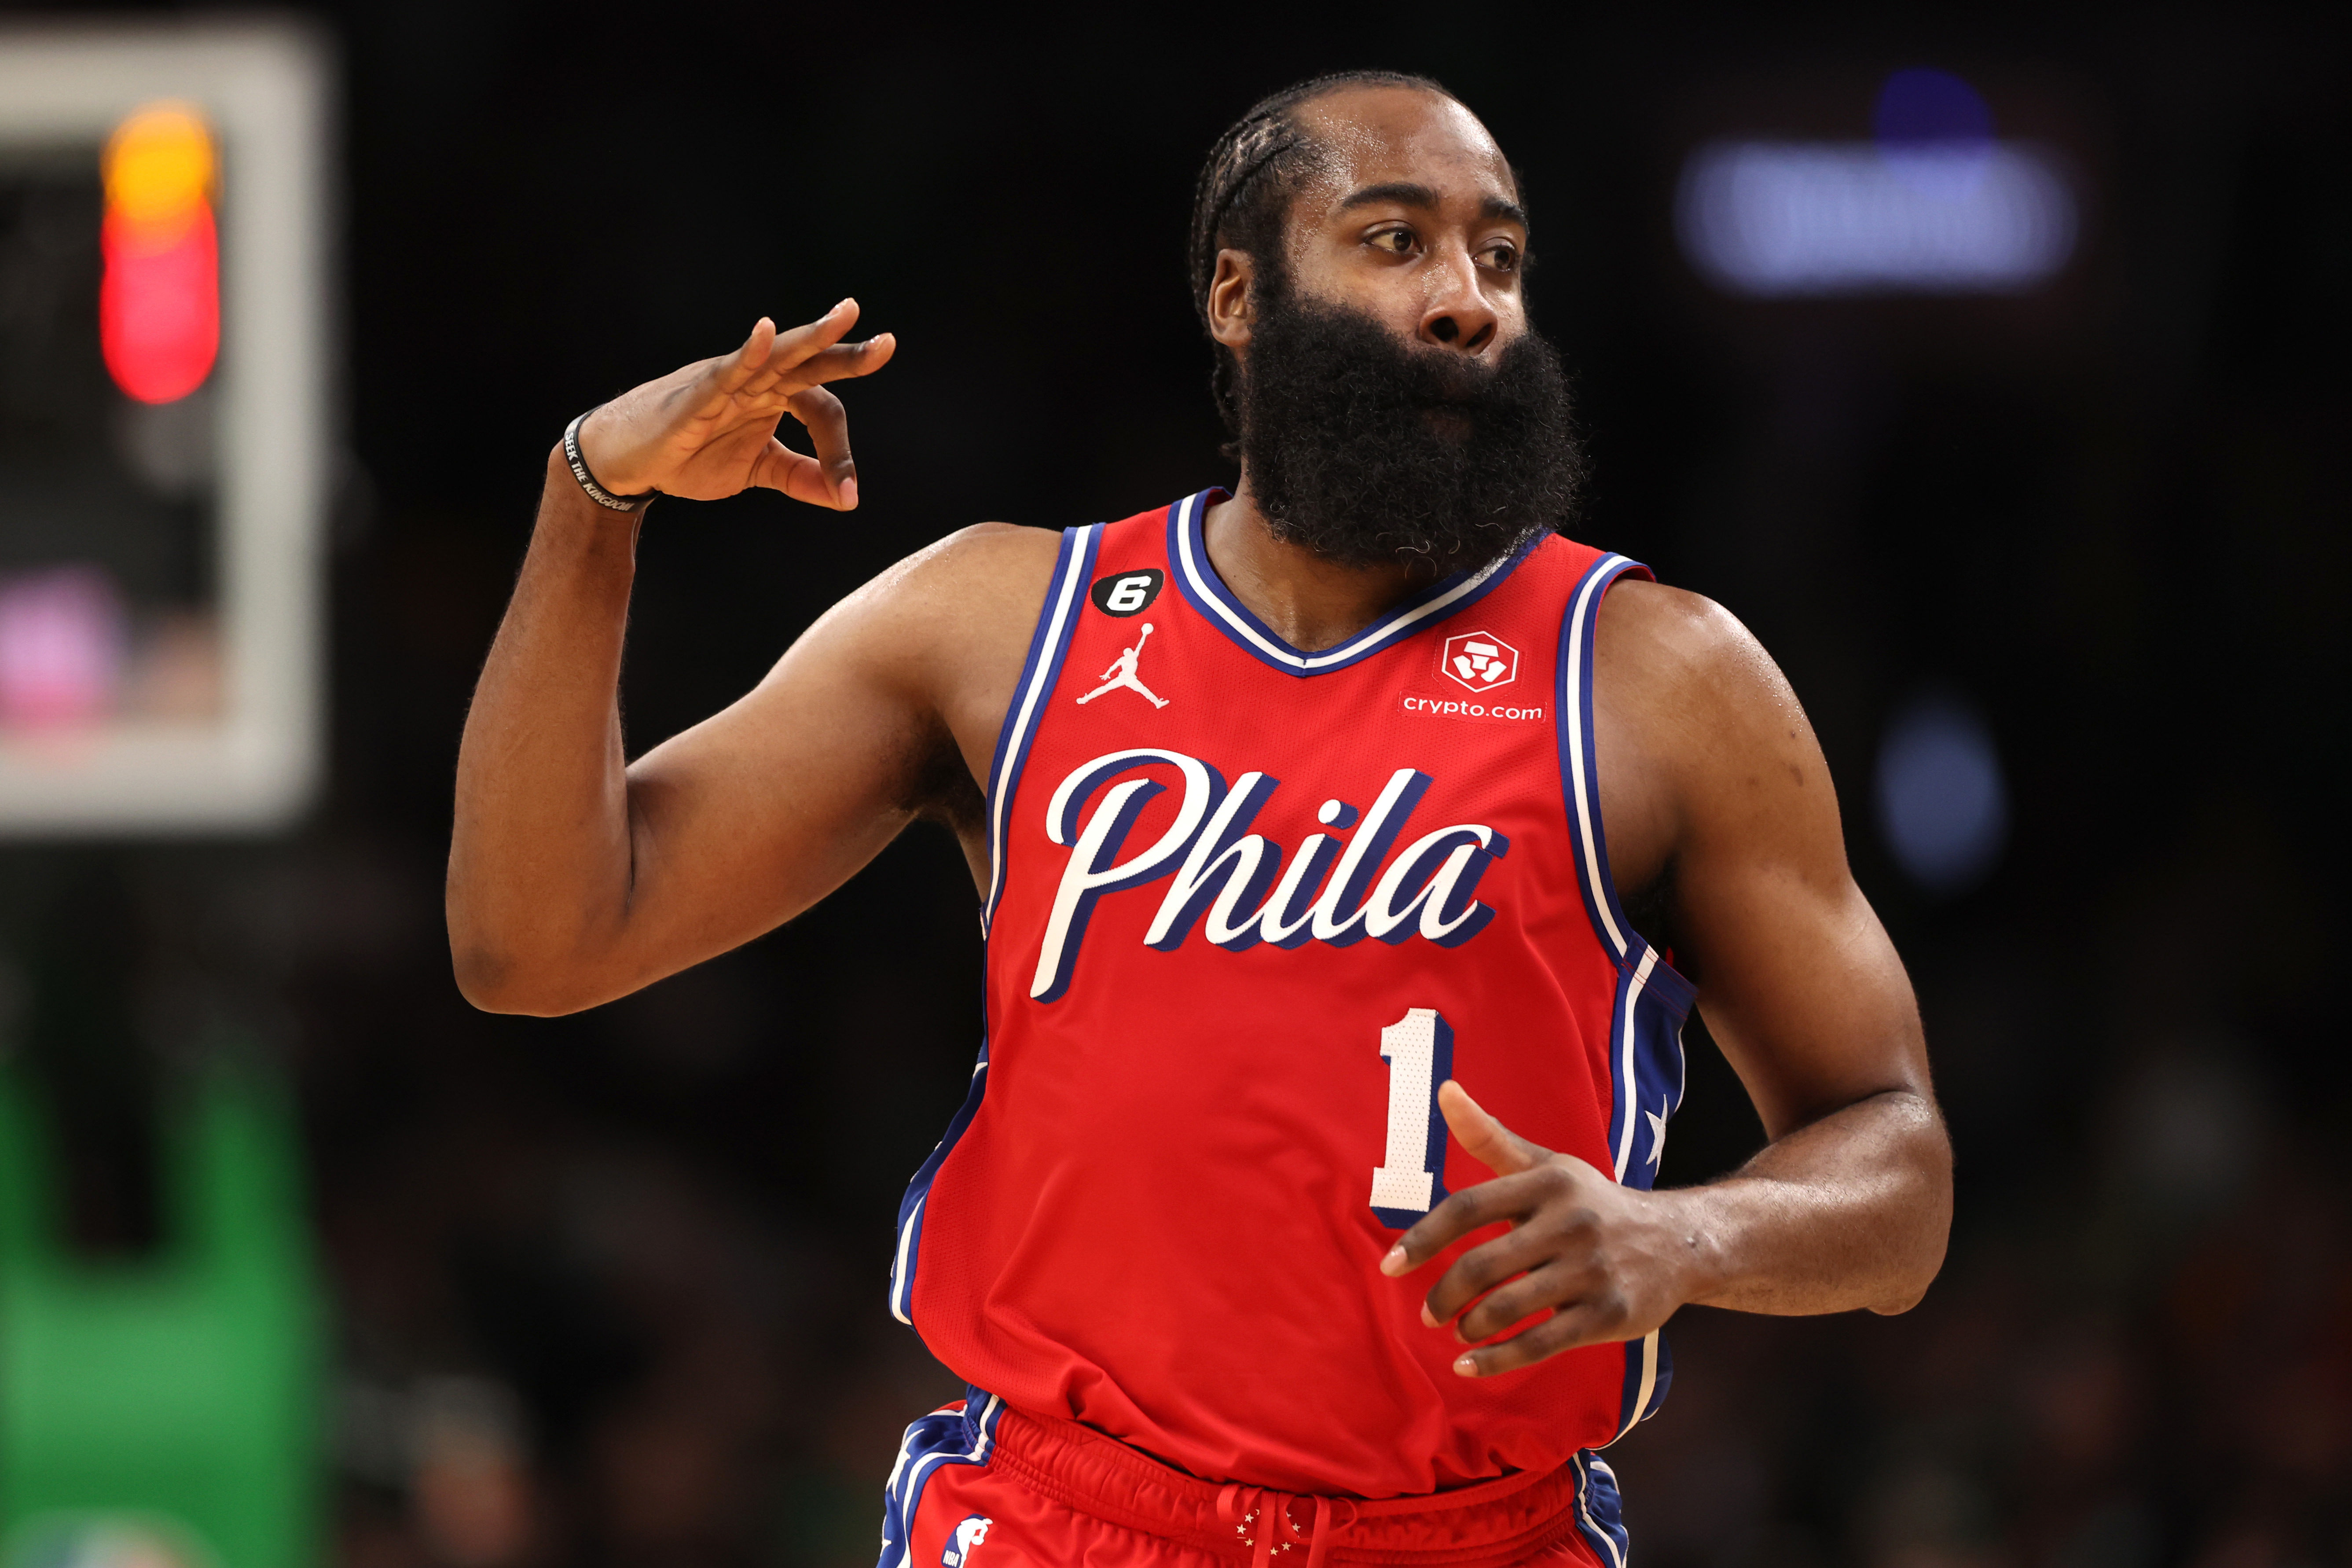 BOSTON, MASSACHUSETTS - MAY 01: James Harden #1 of the Philadelphia 76ers celebrates after hitting a three point shot during the second half against the Boston Celtics in game one of the Eastern Conference Second Round Playoffs at TD Garden on May 01, 2023 in Boston, Massachusetts. The 76ers defeat the Celtics 119-115. NOTE TO USER: User expressly acknowledges and agrees that, by downloading and or using this photograph, User is consenting to the terms and conditions of the Getty Images License 